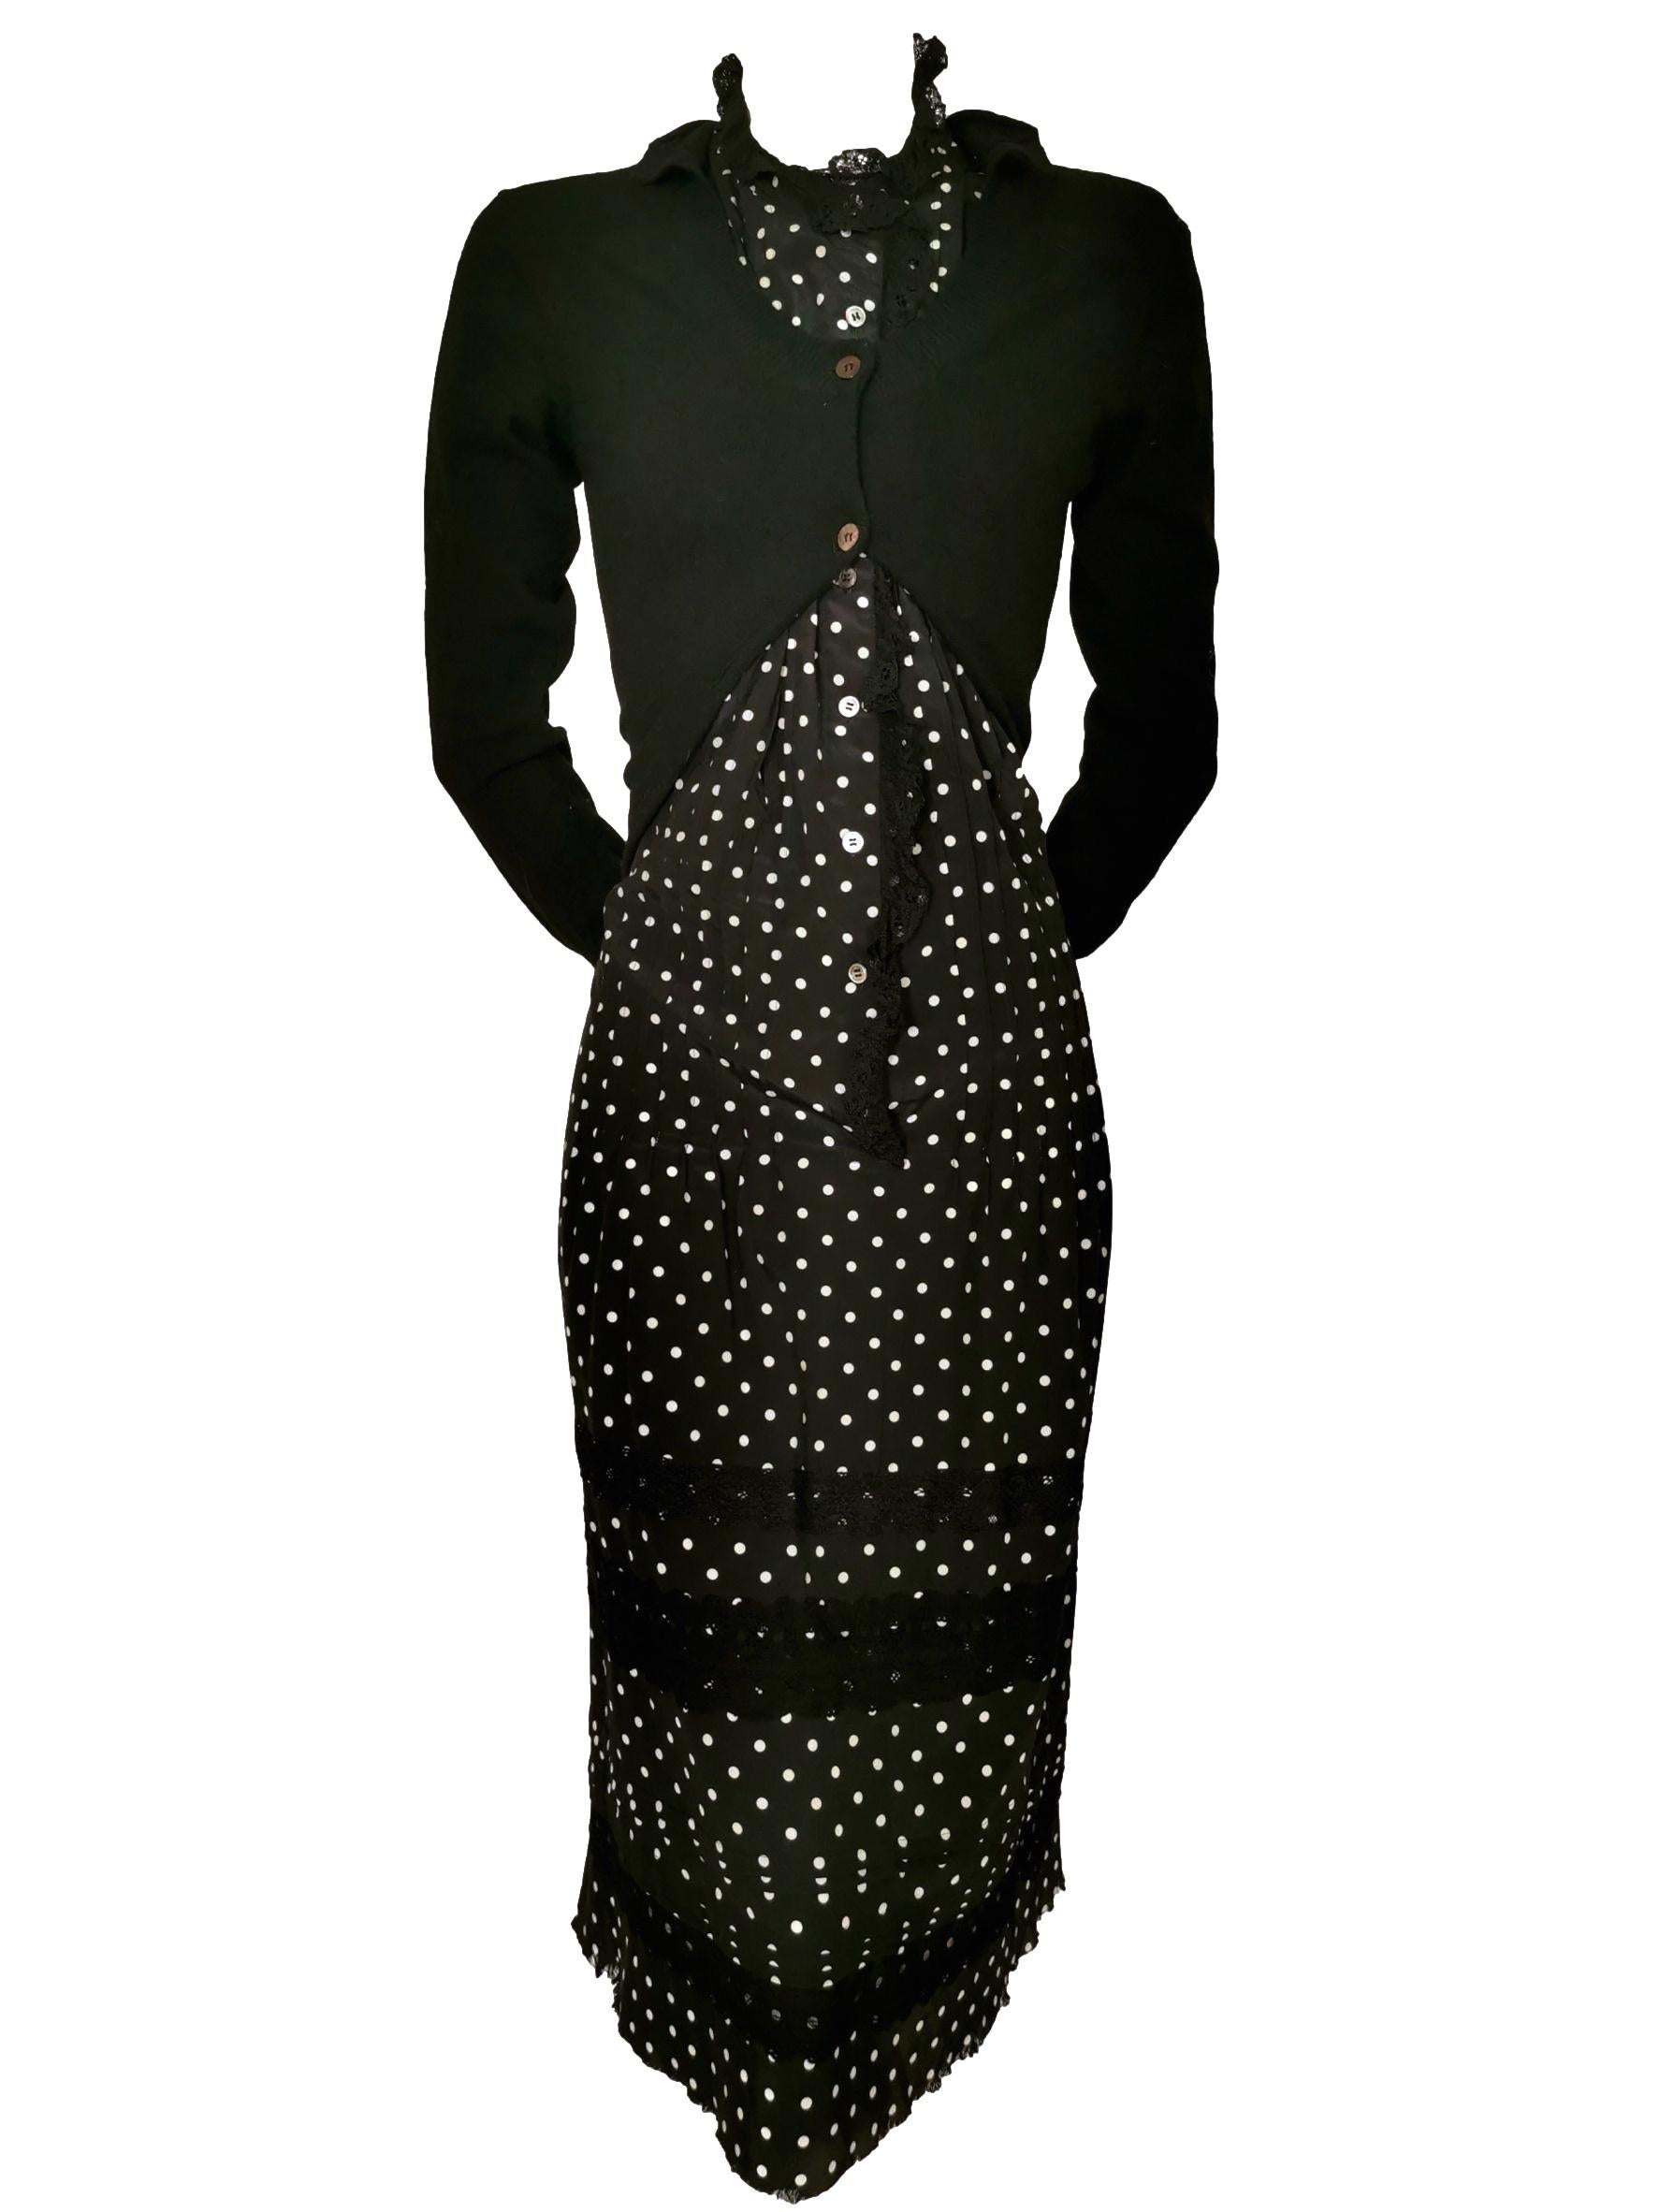 Junya Watanabe Comme des Garcons Twisted Polka Dot Cardigan Dress AD 2007 For Sale 7